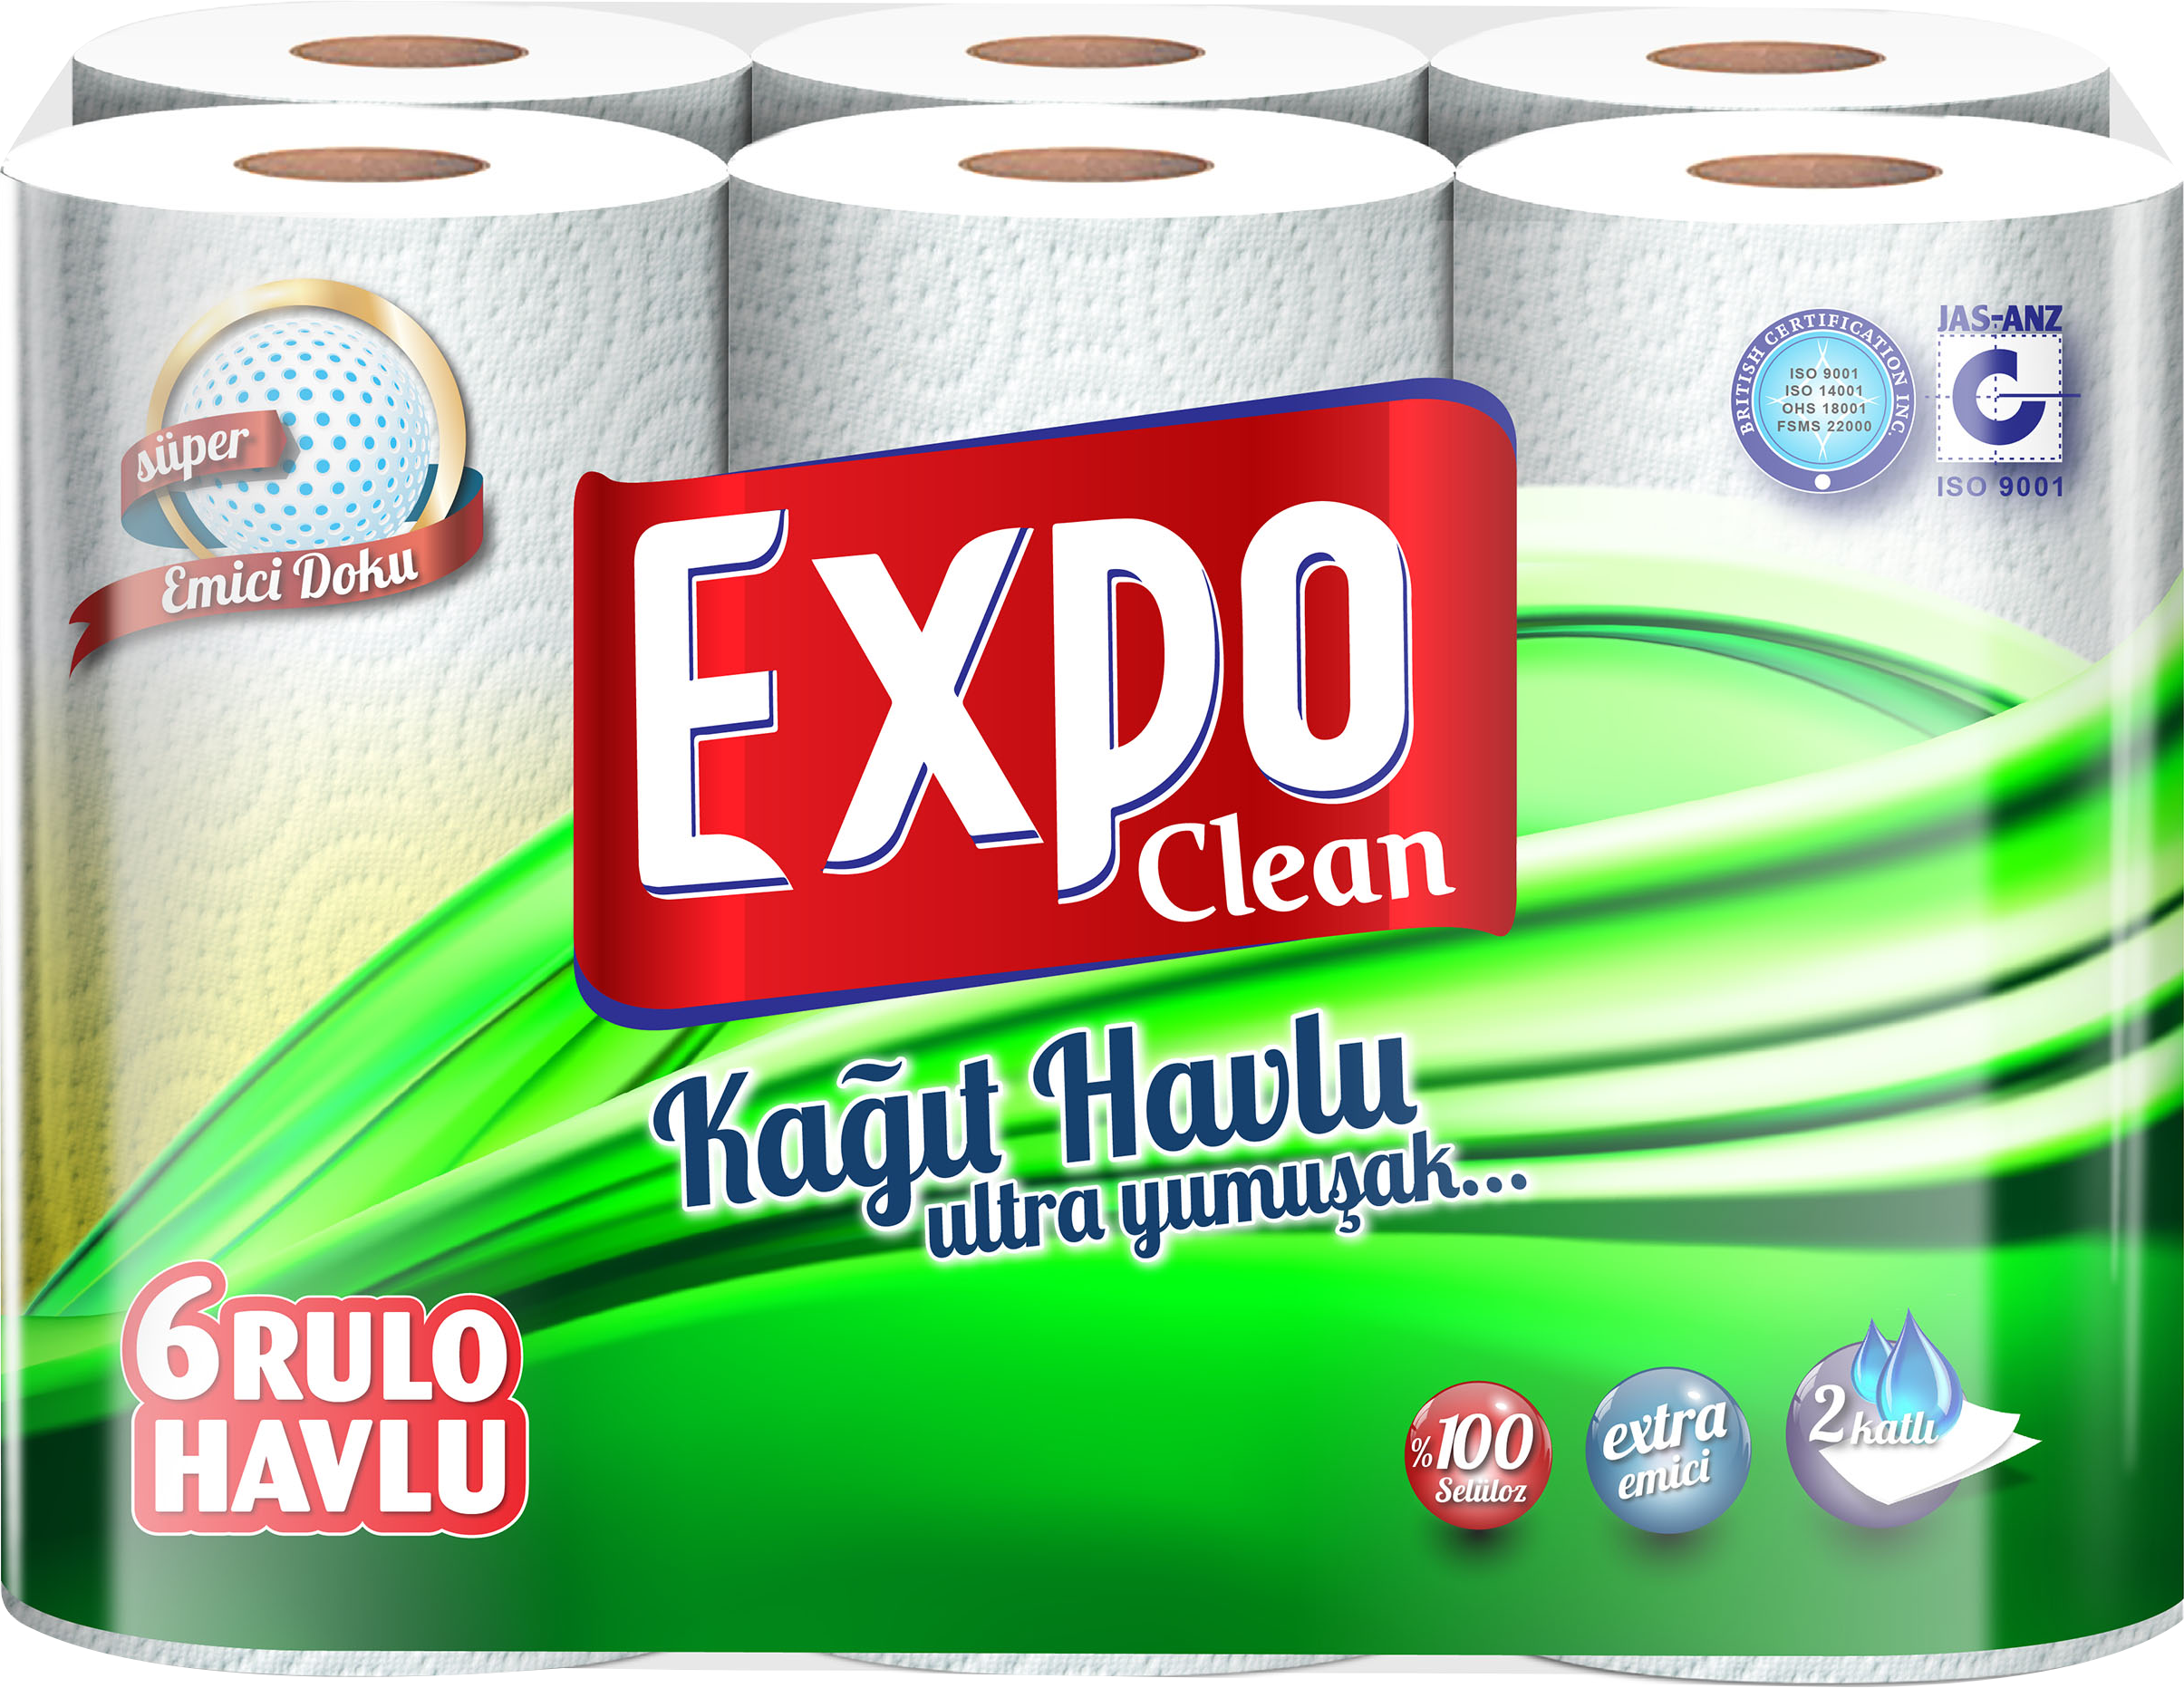 Expo Clean 6-pack of rolled towels